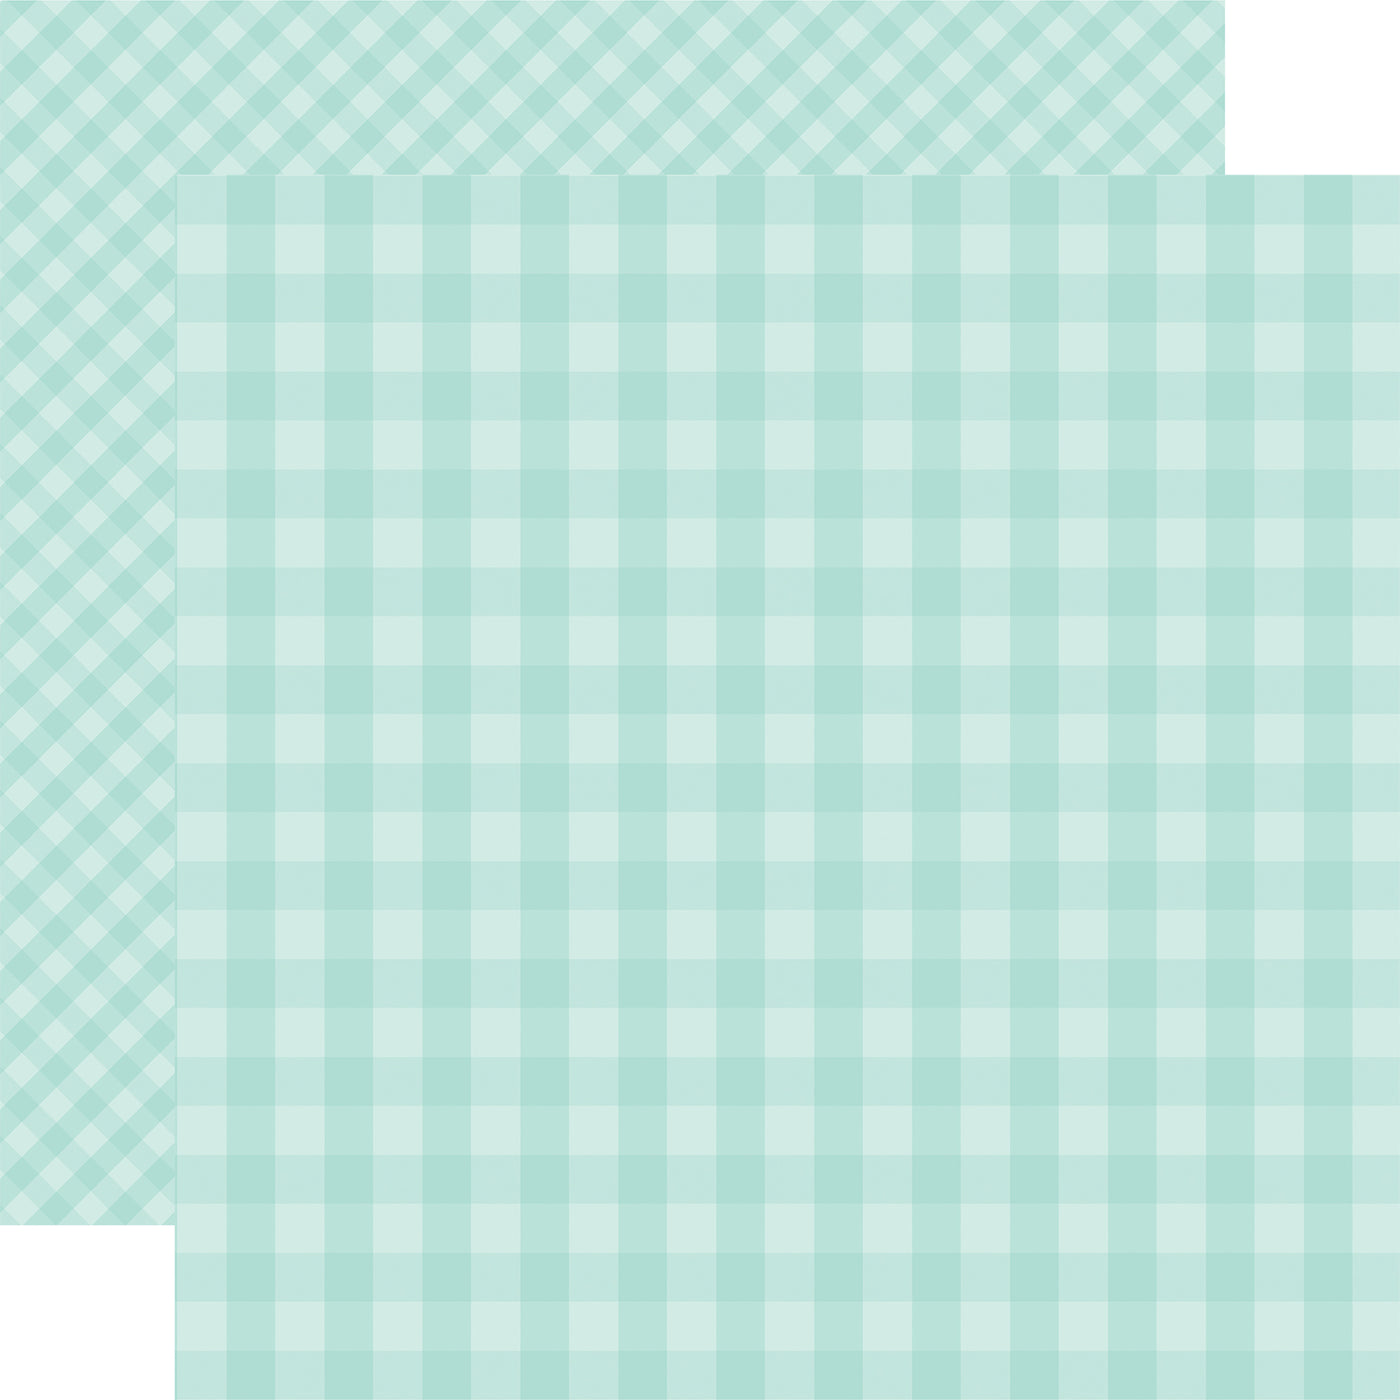 SPRING GINGHAM 12x12 Paper Pack - Echo Park